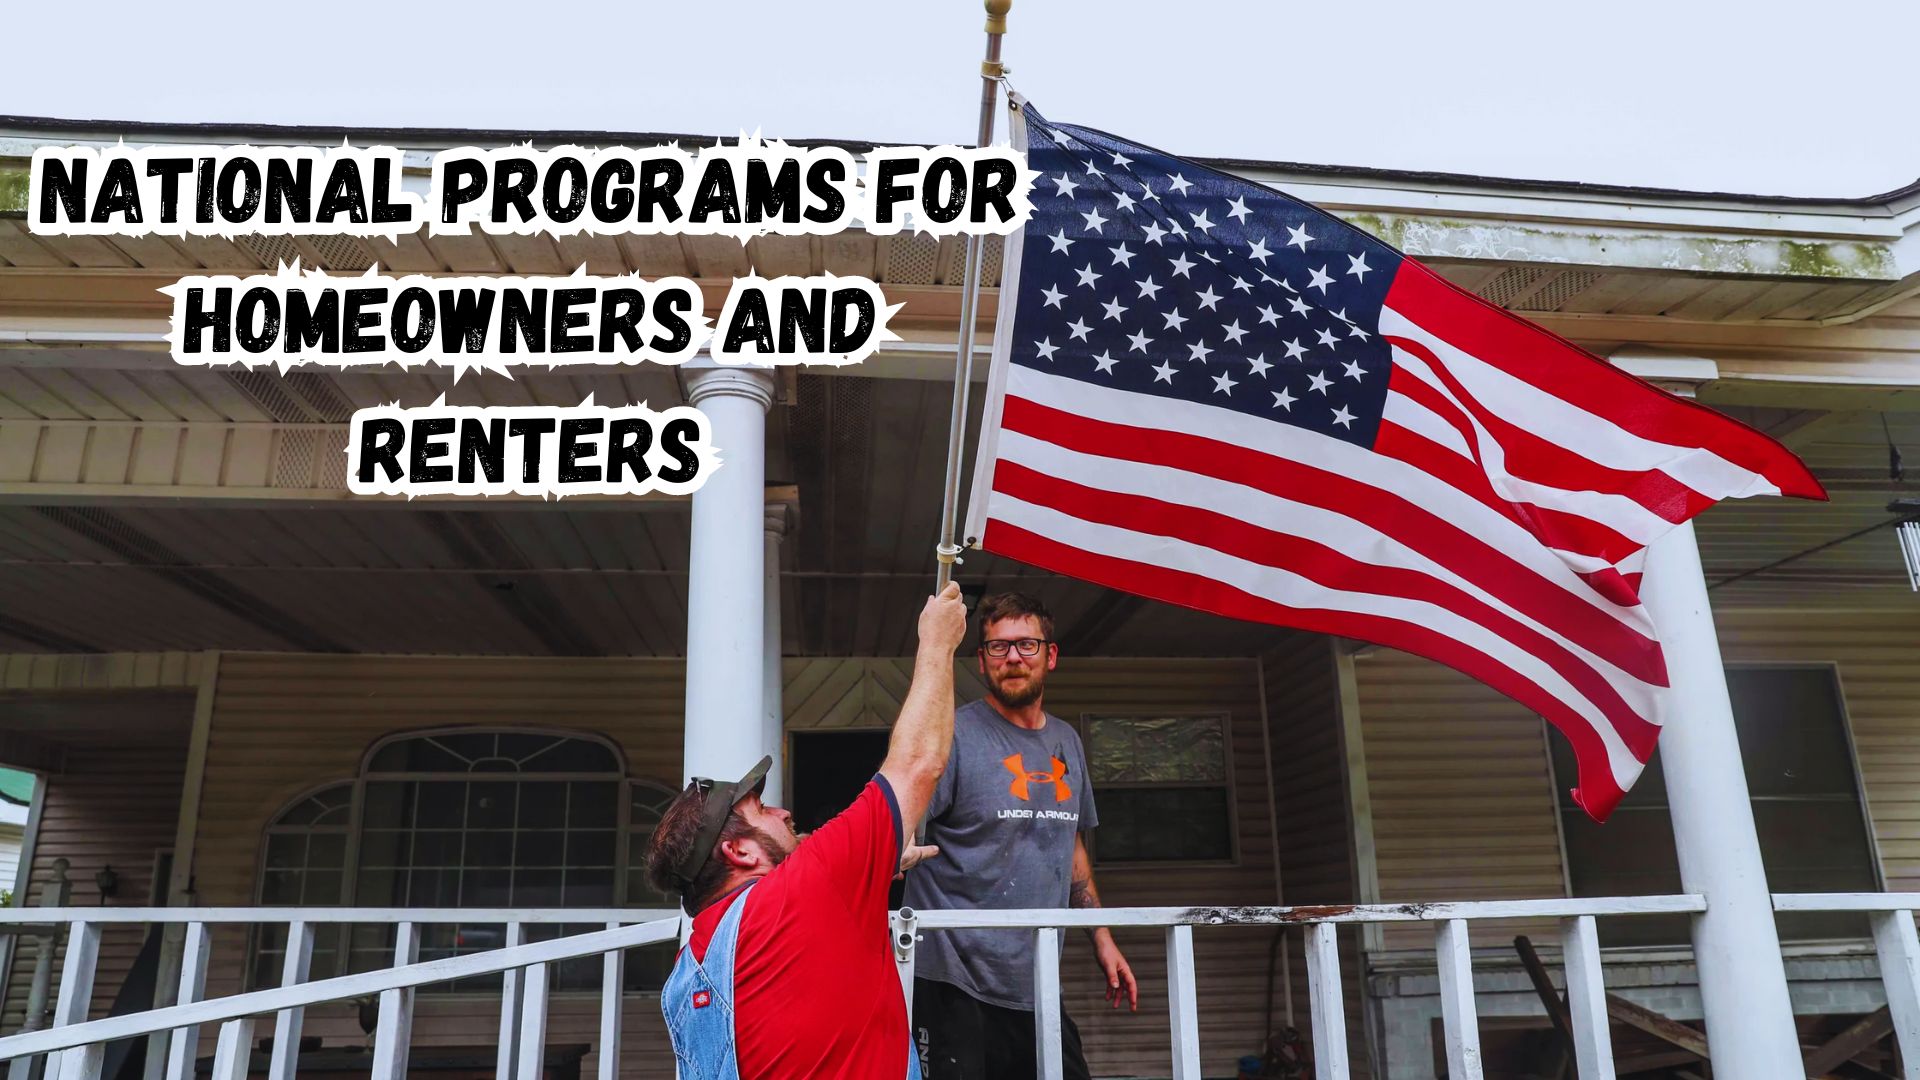 National Programs for Homeowners and Renters.